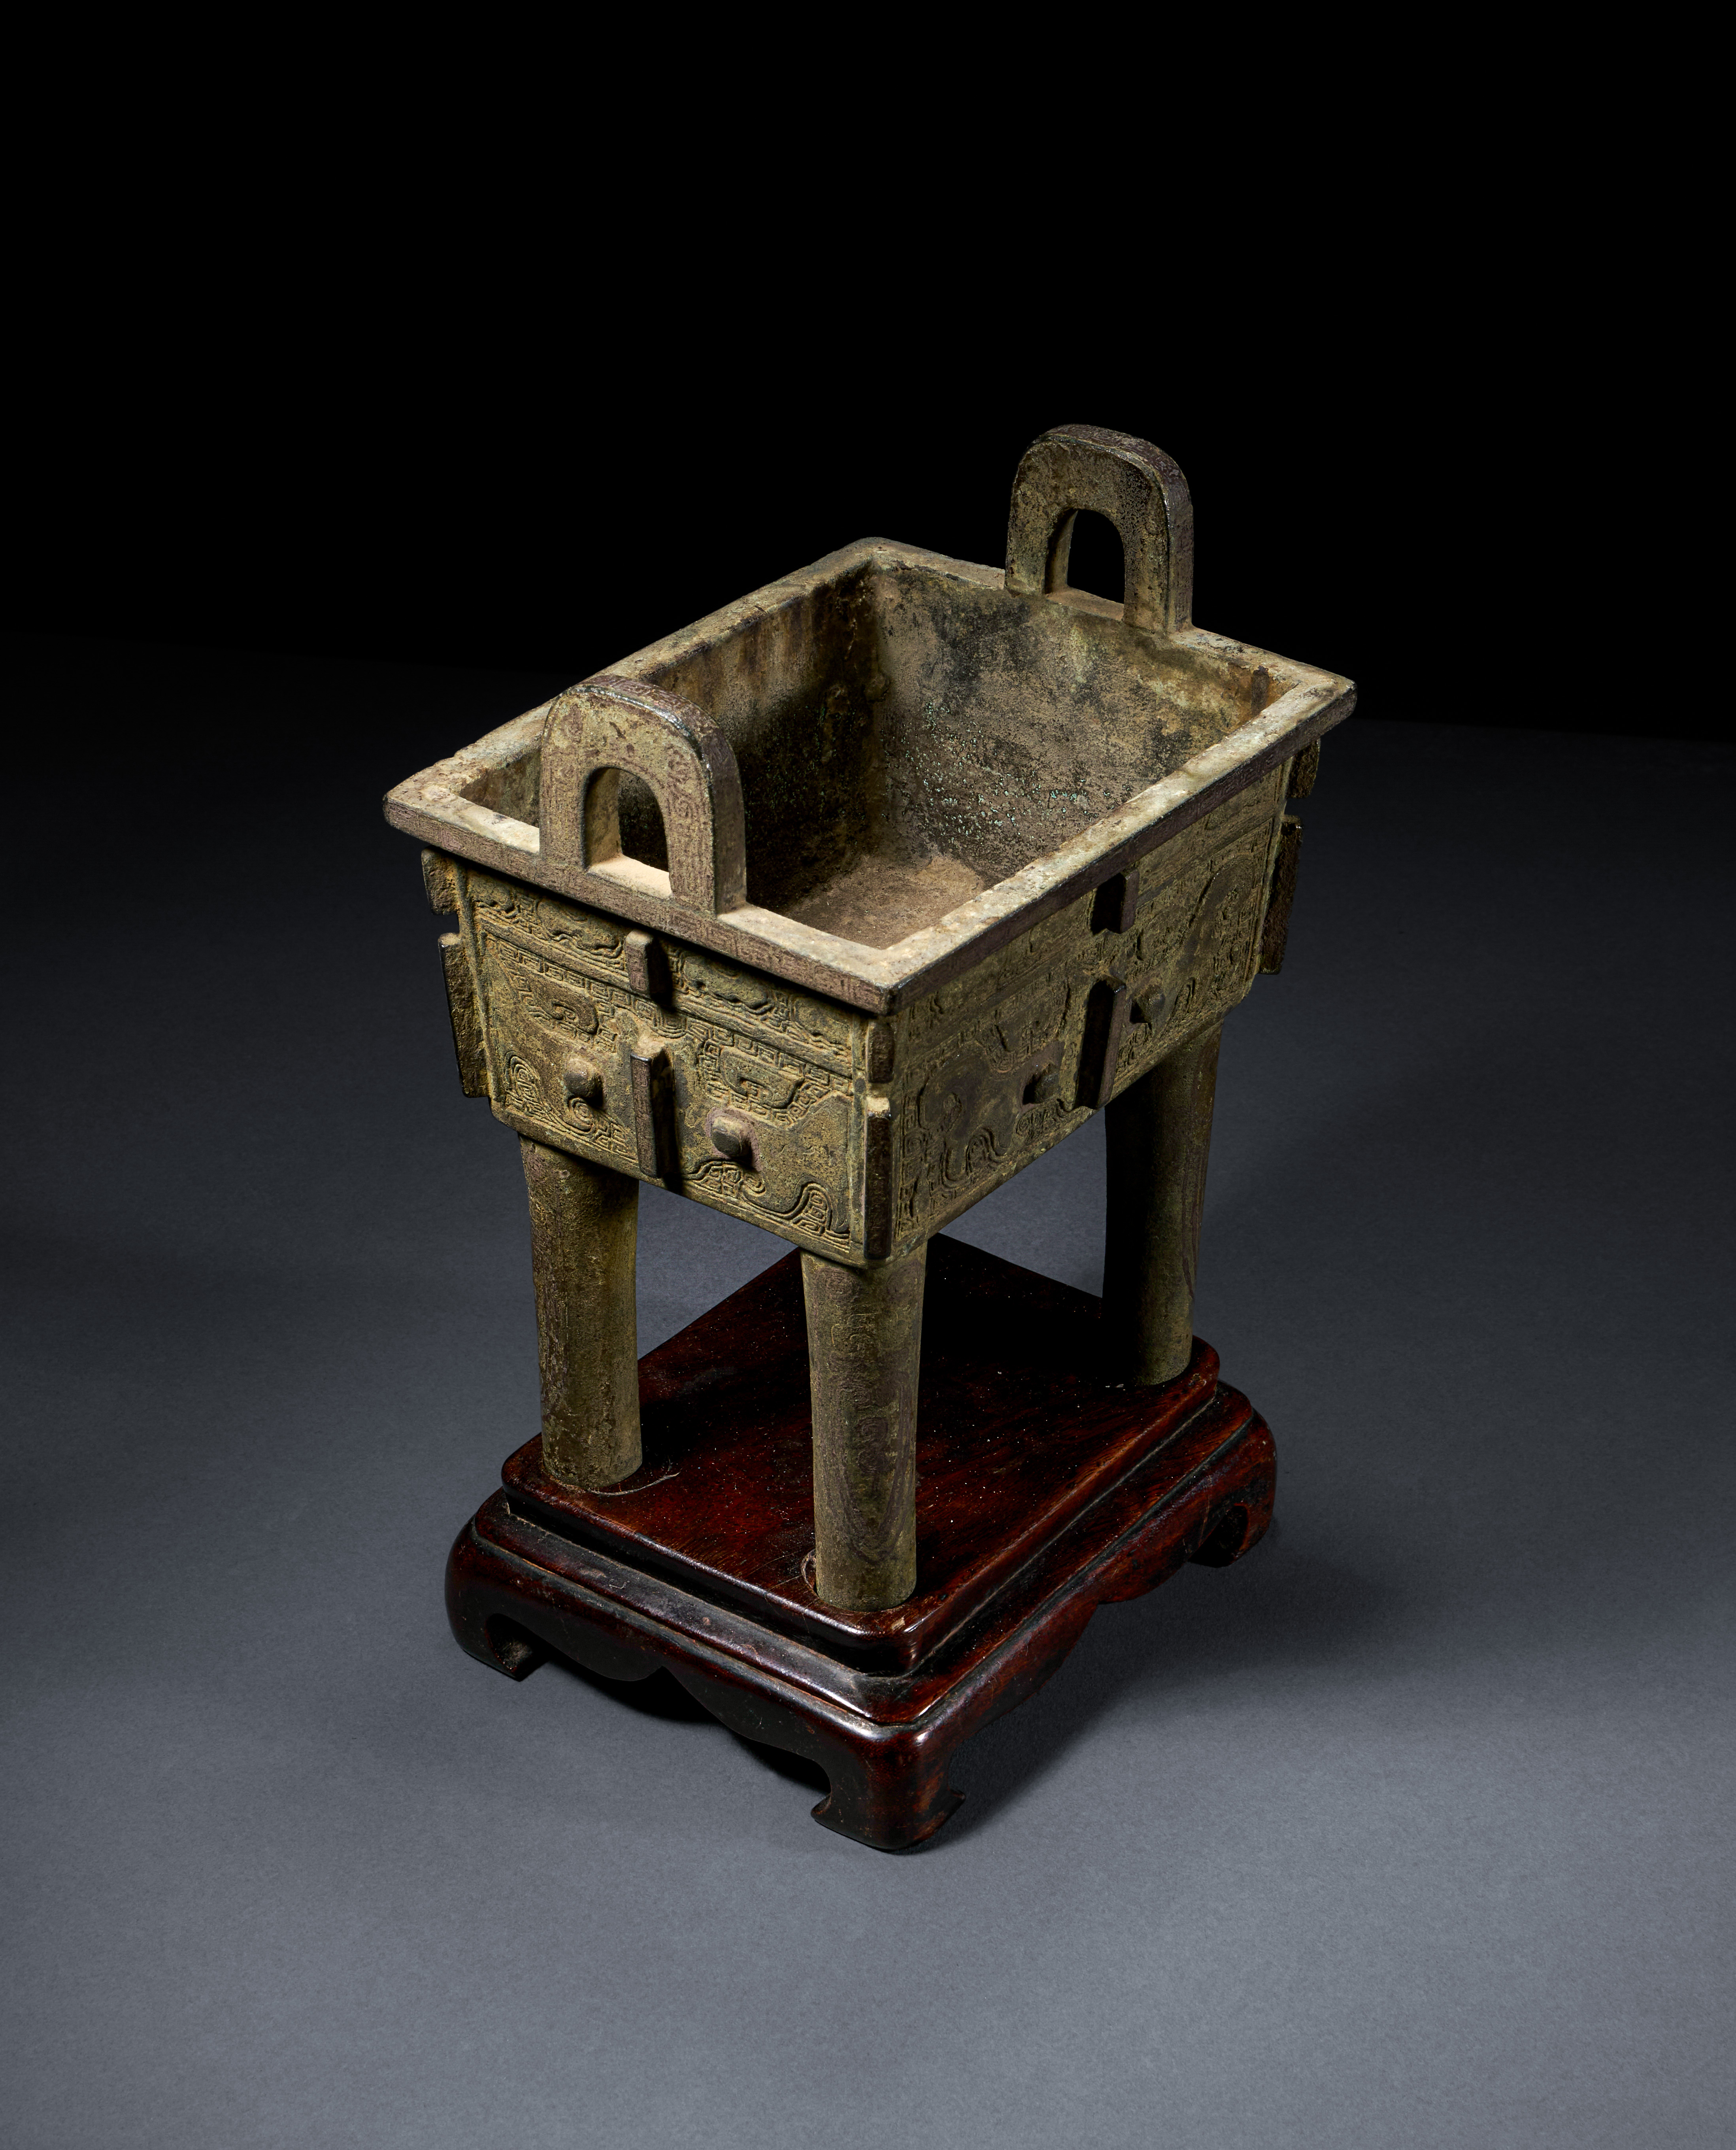 A BRONZE RITUAL RECTANGULAR FOOD VESSEL, FANGDING, LATE SHANG DYNASTY, ANYANG, 12TH-11TH CENTURY BC - Bild 3 aus 4